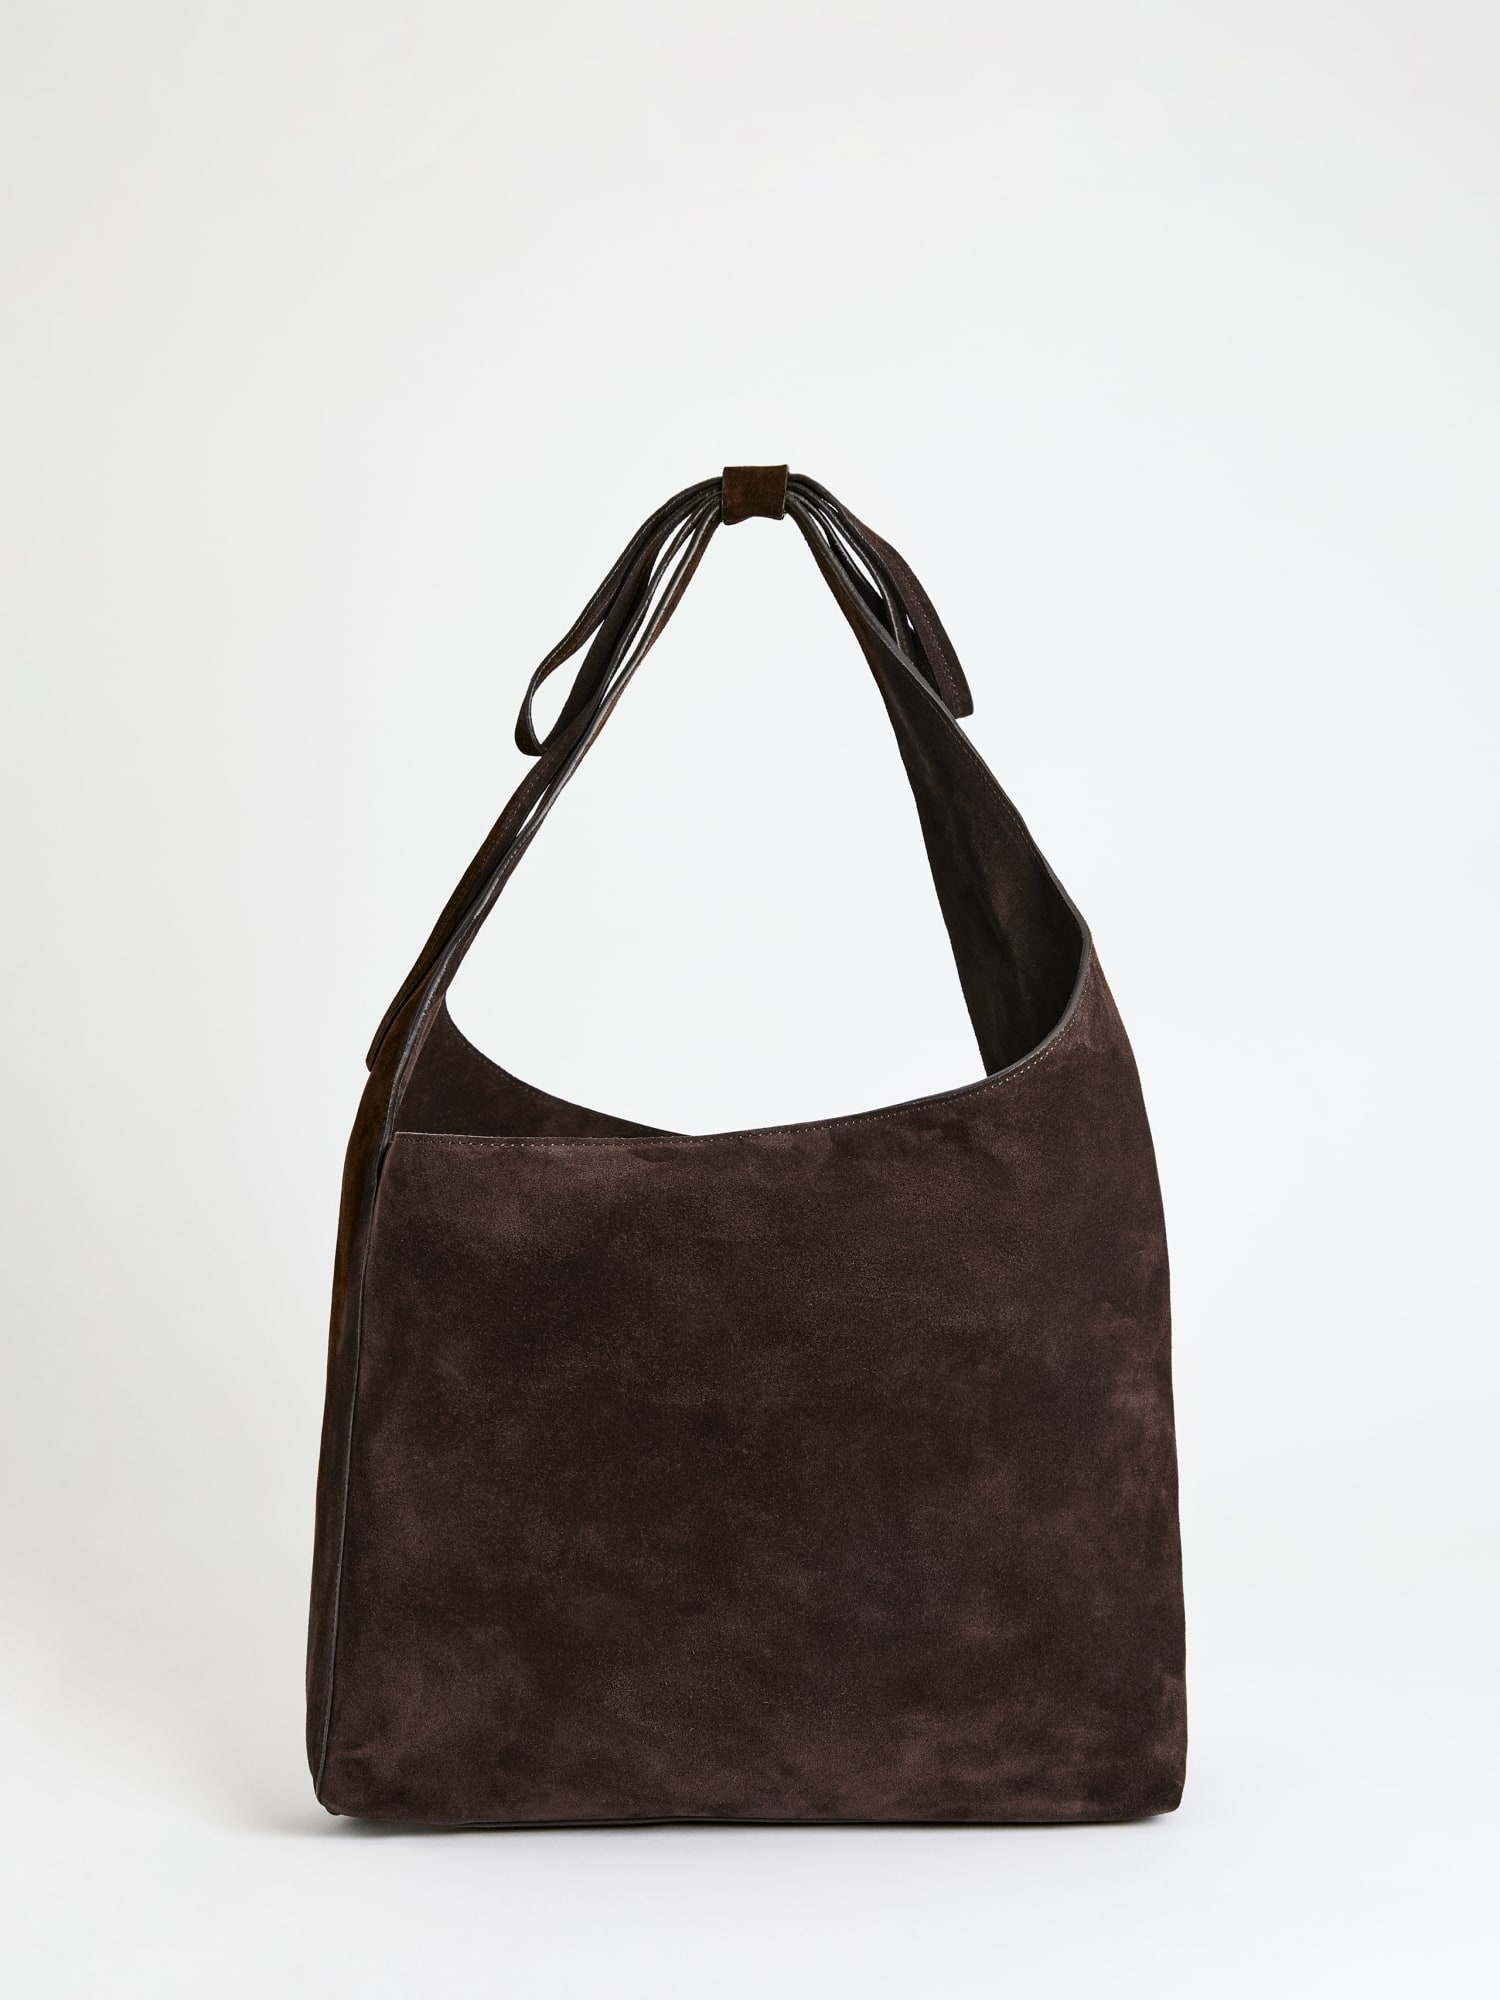 Truffle Collection zip pocket tote bag in black